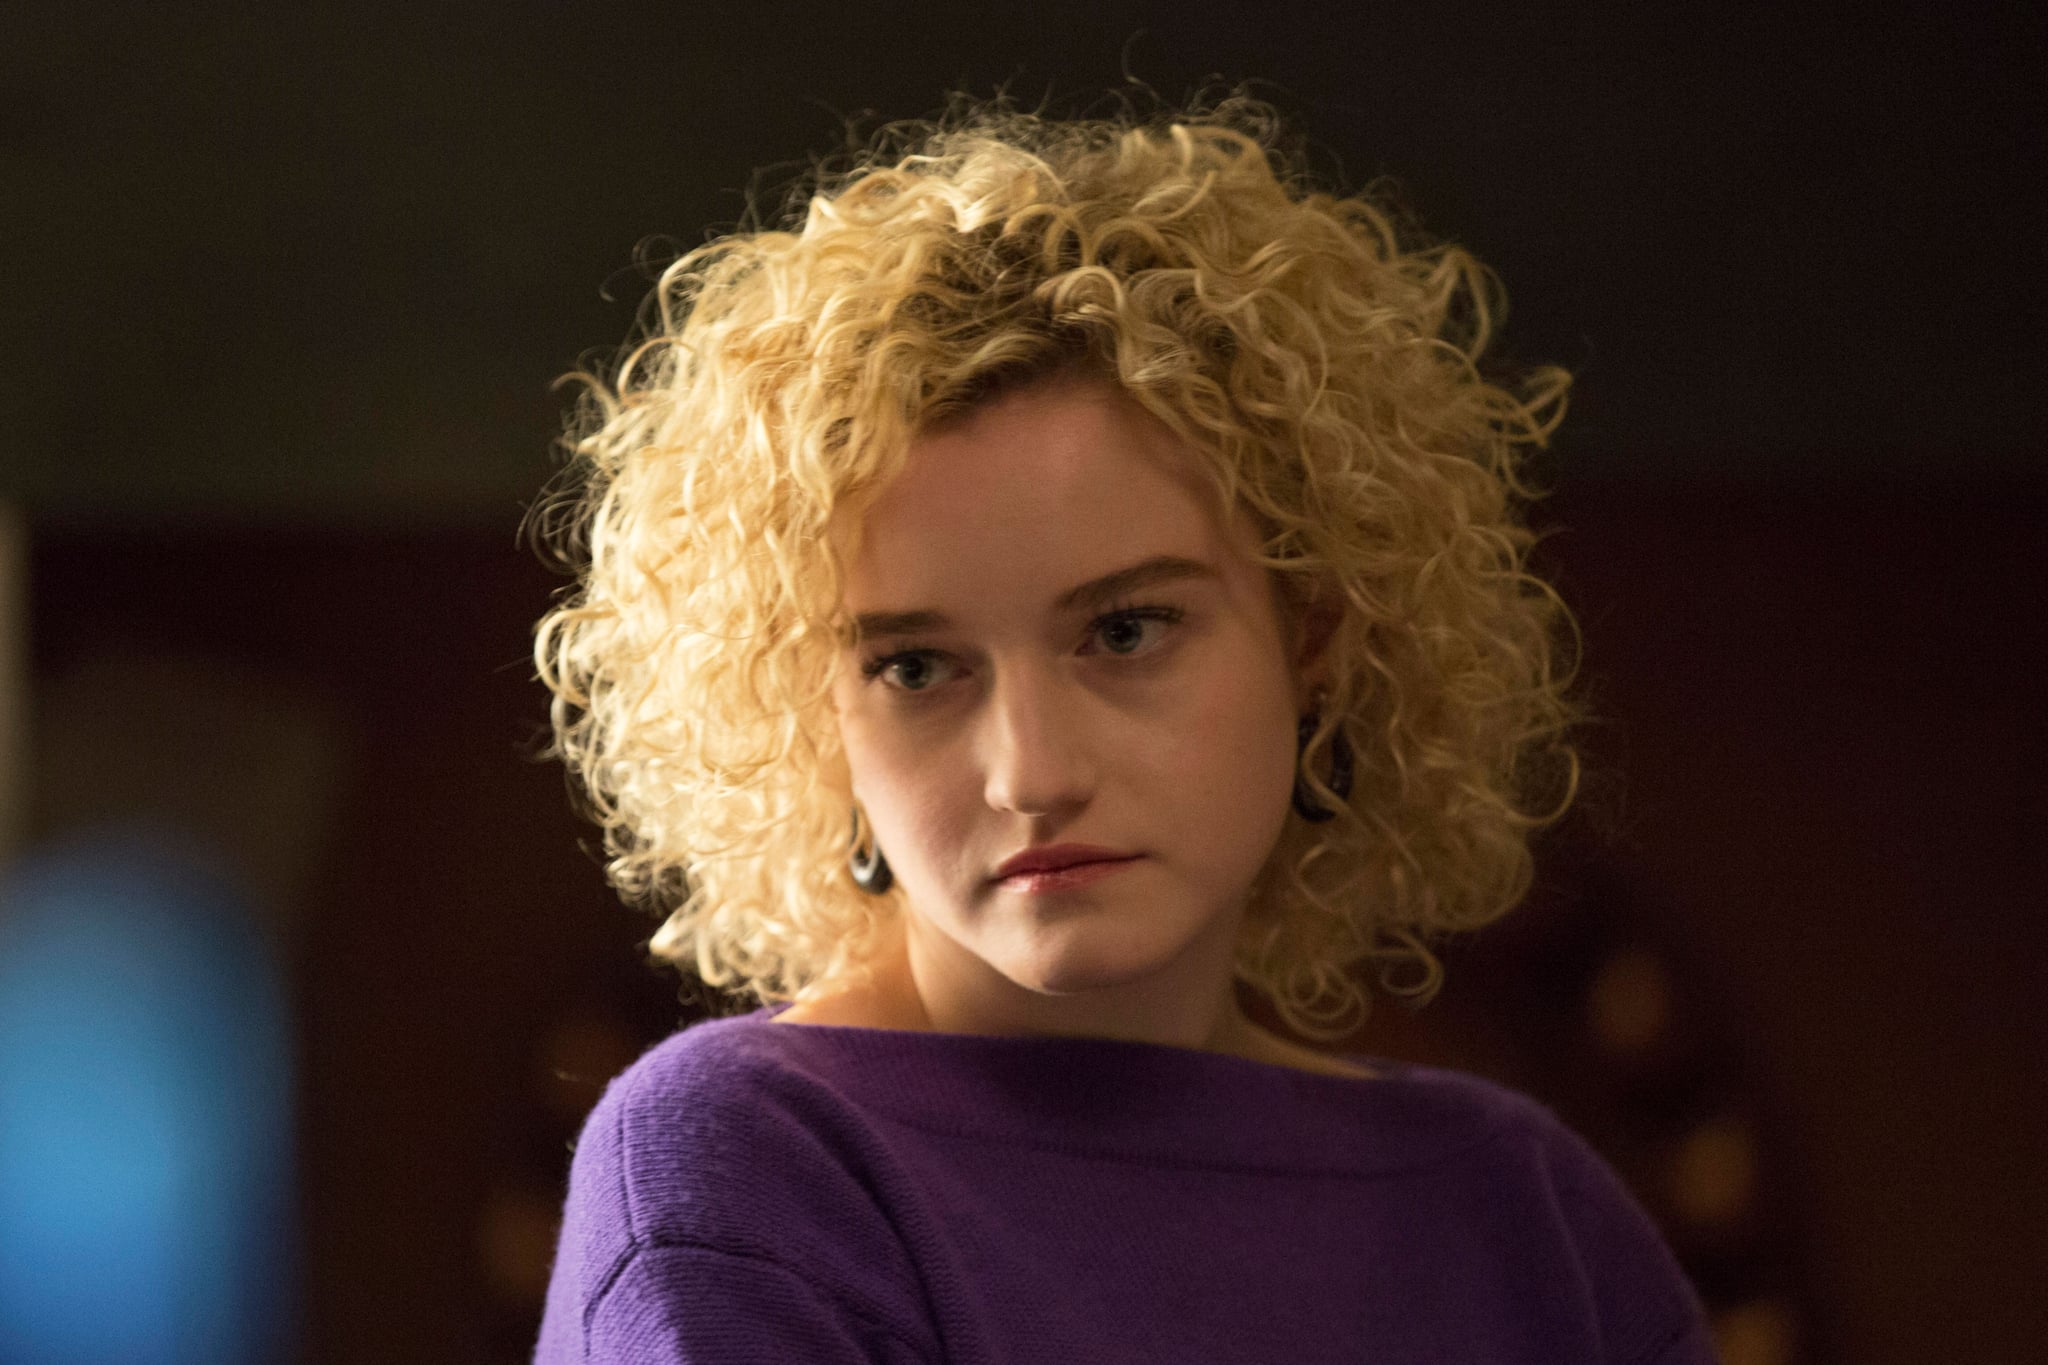 Kimberly Breland in Americans | Ozark May Have Won Her the (Again!), but Julia Garner Has Had Plenty of Other Roles | POPSUGAR Entertainment Photo 6